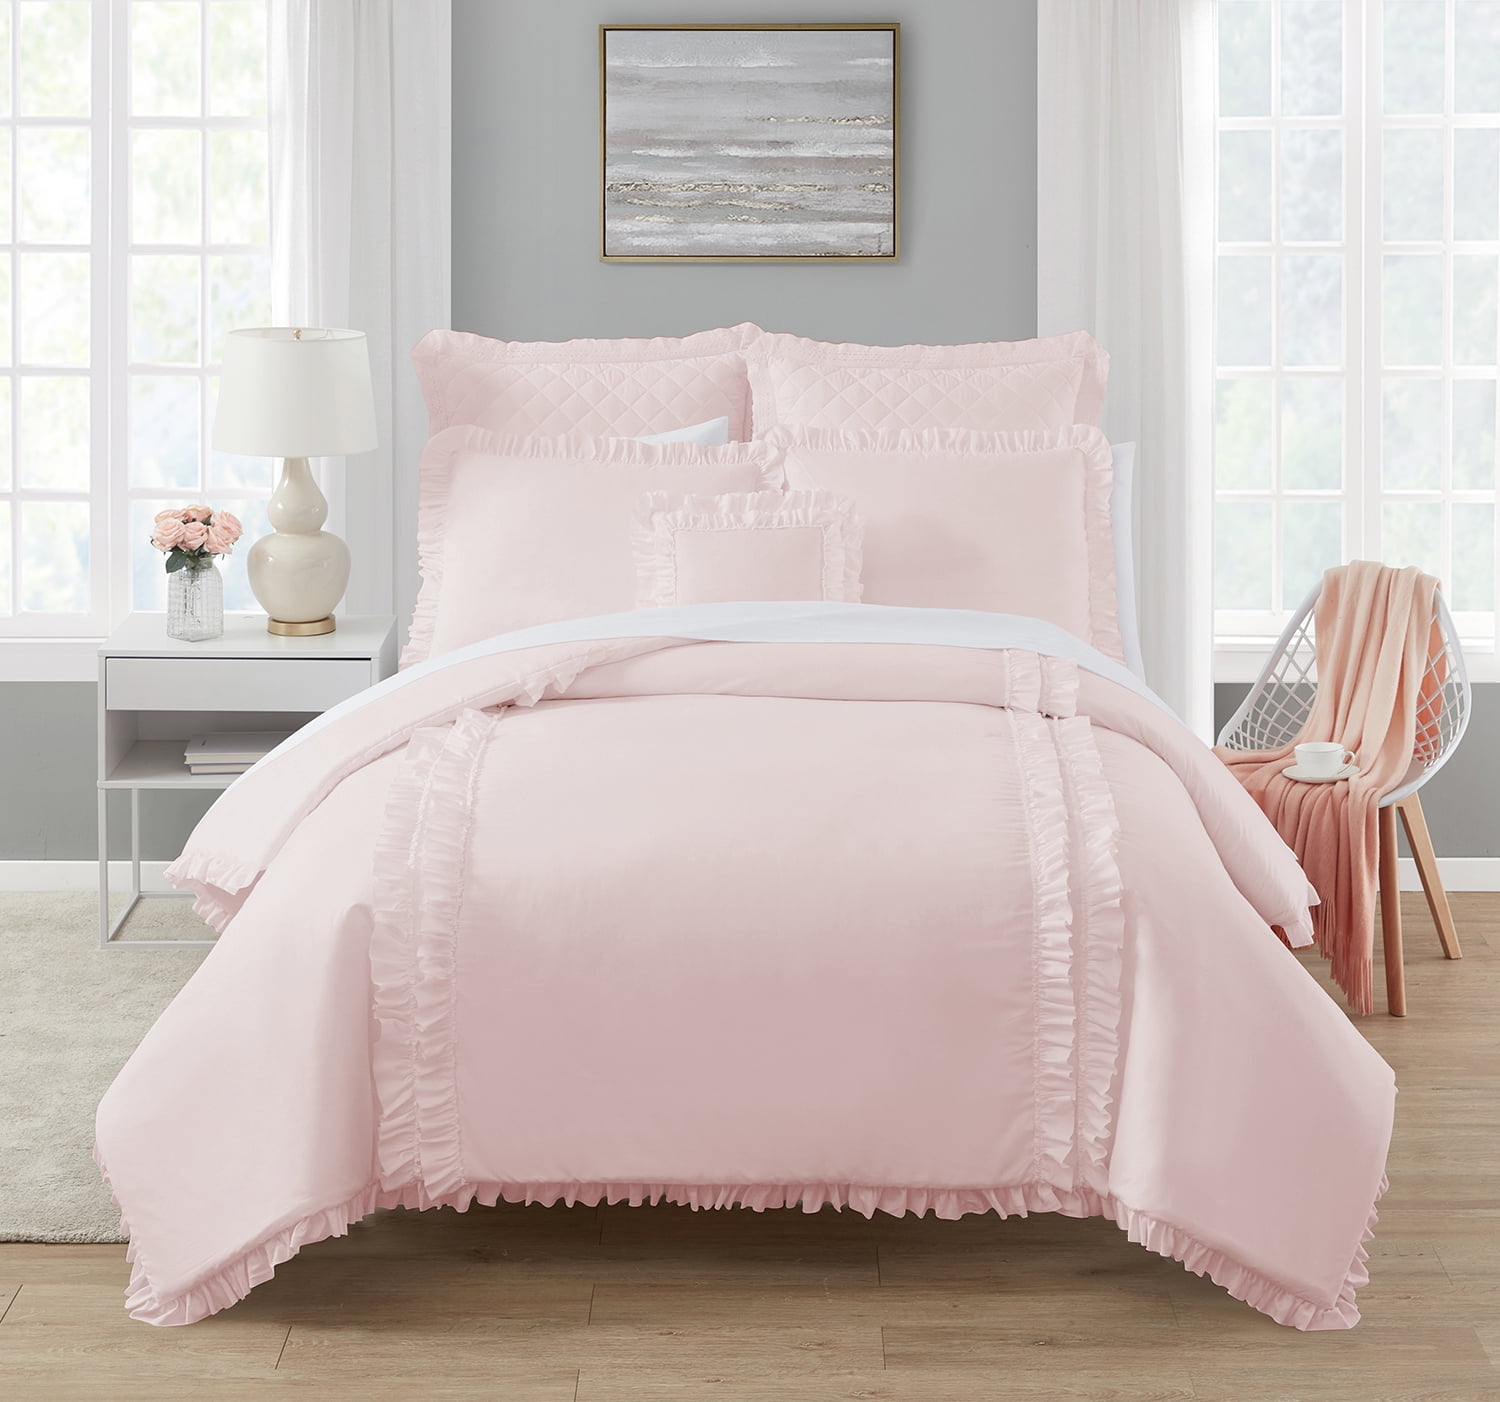 Simply Shabby Chic Pink Ruffle 4-Piece Soft Washed Microfiber Comforter Set, Full/Queen